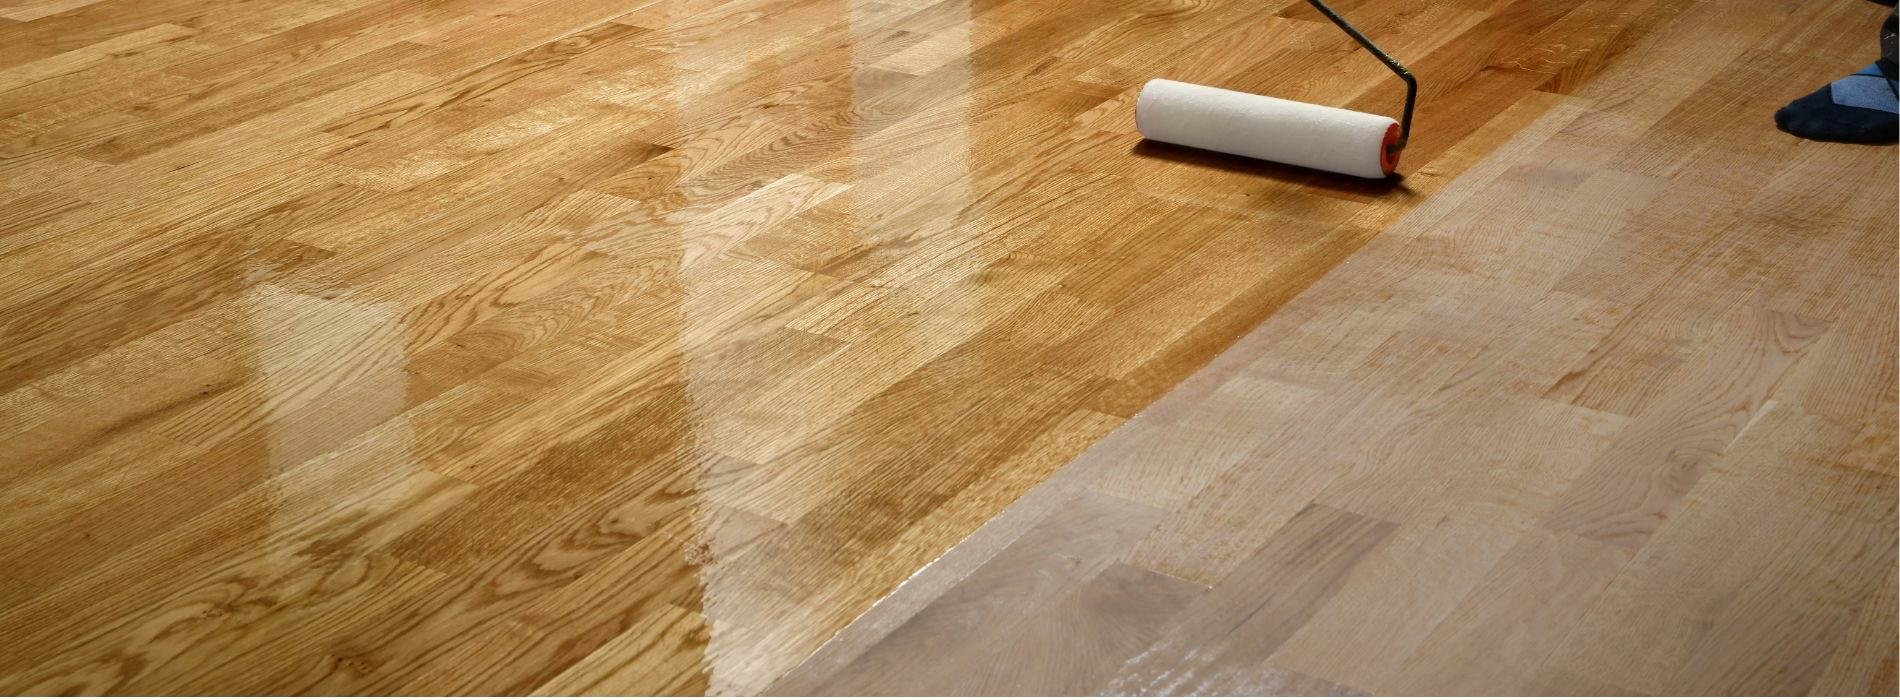 Experience the revitalization of engineered 2-strip oak flooring, freshly sanded and sealed with three coats of Bona Mega satin, offering a 45% sheen reflection for a stunning finish.